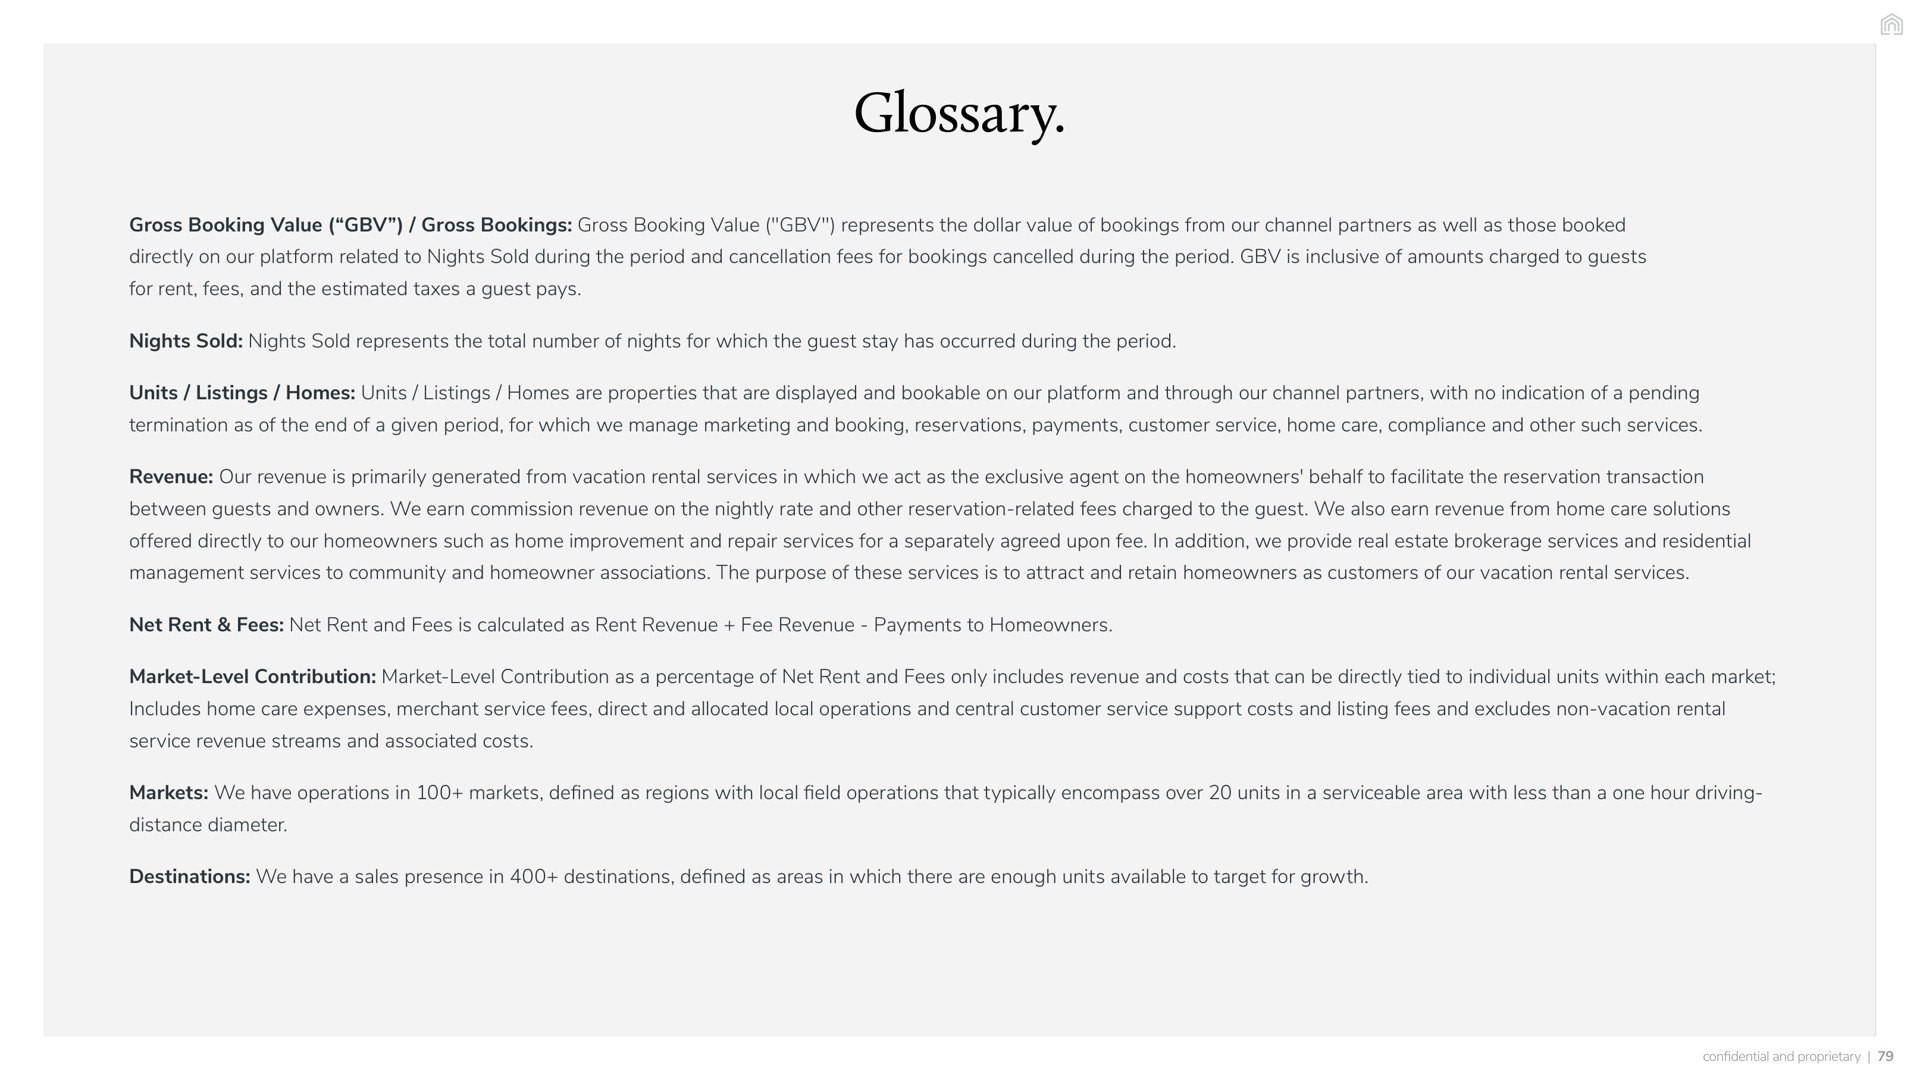 glossary gross booking value gross bookings gross booking value represents the dollar value of bookings from our channel partners as well as those booked directly on our platform related to nights sold during the period and cancellation fees for bookings cancelled during the period is inclusive of amounts charged to guests for rent fees and the estimated taxes a guest pays nights sold nights sold represents the total number of nights for which the guest stay has occurred during the period units listings homes units listings homes are properties that are displayed and bookable on our platform and through our channel partners with no indication of a pending termination as of the end of a given period for which we manage marketing and booking reservations payments customer service home care compliance and other such services revenue our revenue is primarily generated from vacation rental services in which we act as the exclusive agent on the homeowners behalf to facilitate the reservation transaction between guests and owners we earn commission revenue on the nightly rate and other reservation related fees charged to the guest we also earn revenue from home care solutions offered directly to our homeowners such as home improvement and repair services for a separately agreed upon fee in addition we provide real estate brokerage services and residential management services to community and homeowner associations the purpose of these services is to attract and retain homeowners as customers of our vacation rental services net rent fees net rent and fees is calculated as rent revenue fee revenue payments to homeowners market level contribution market level contribution as a percentage of net rent and fees only includes revenue and costs that can be directly tied to individual units within each market includes home care expenses merchant service fees direct and allocated local operations and central customer service support costs and listing fees and excludes non vacation rental service revenue streams and associated costs markets we have operations in markets defined as regions with local field operations that typically encompass over units in a serviceable area with less than a one hour driving distance diameter destinations we have a sales presence in destinations defined as areas in which there are enough units available to target for growth | Vacasa